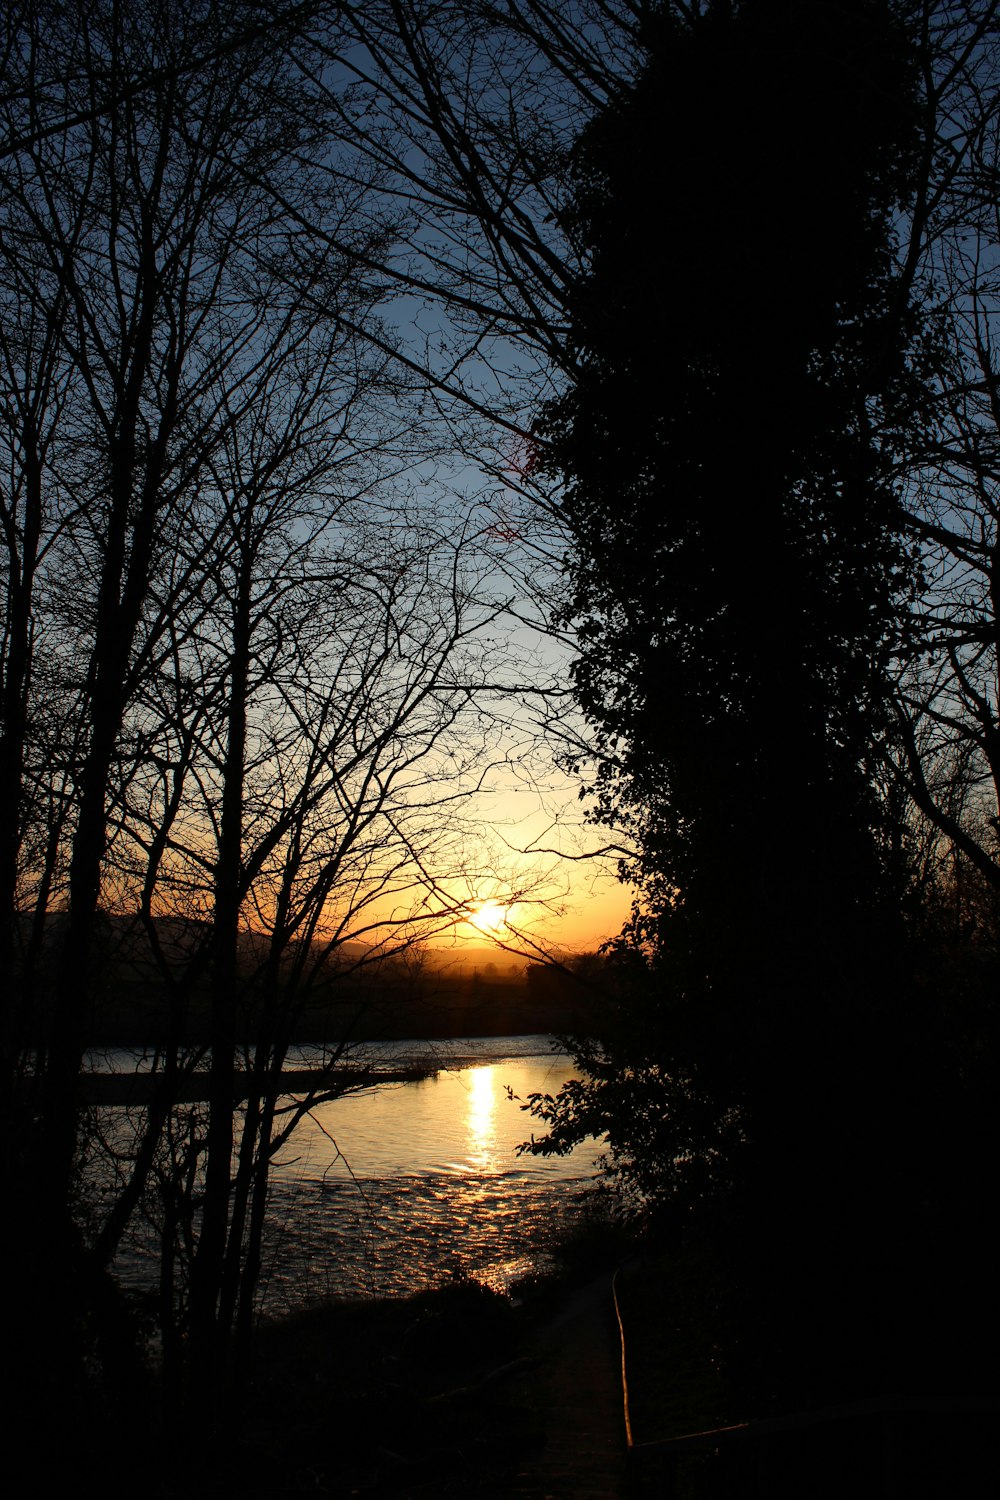 bare trees near body of water during sunset